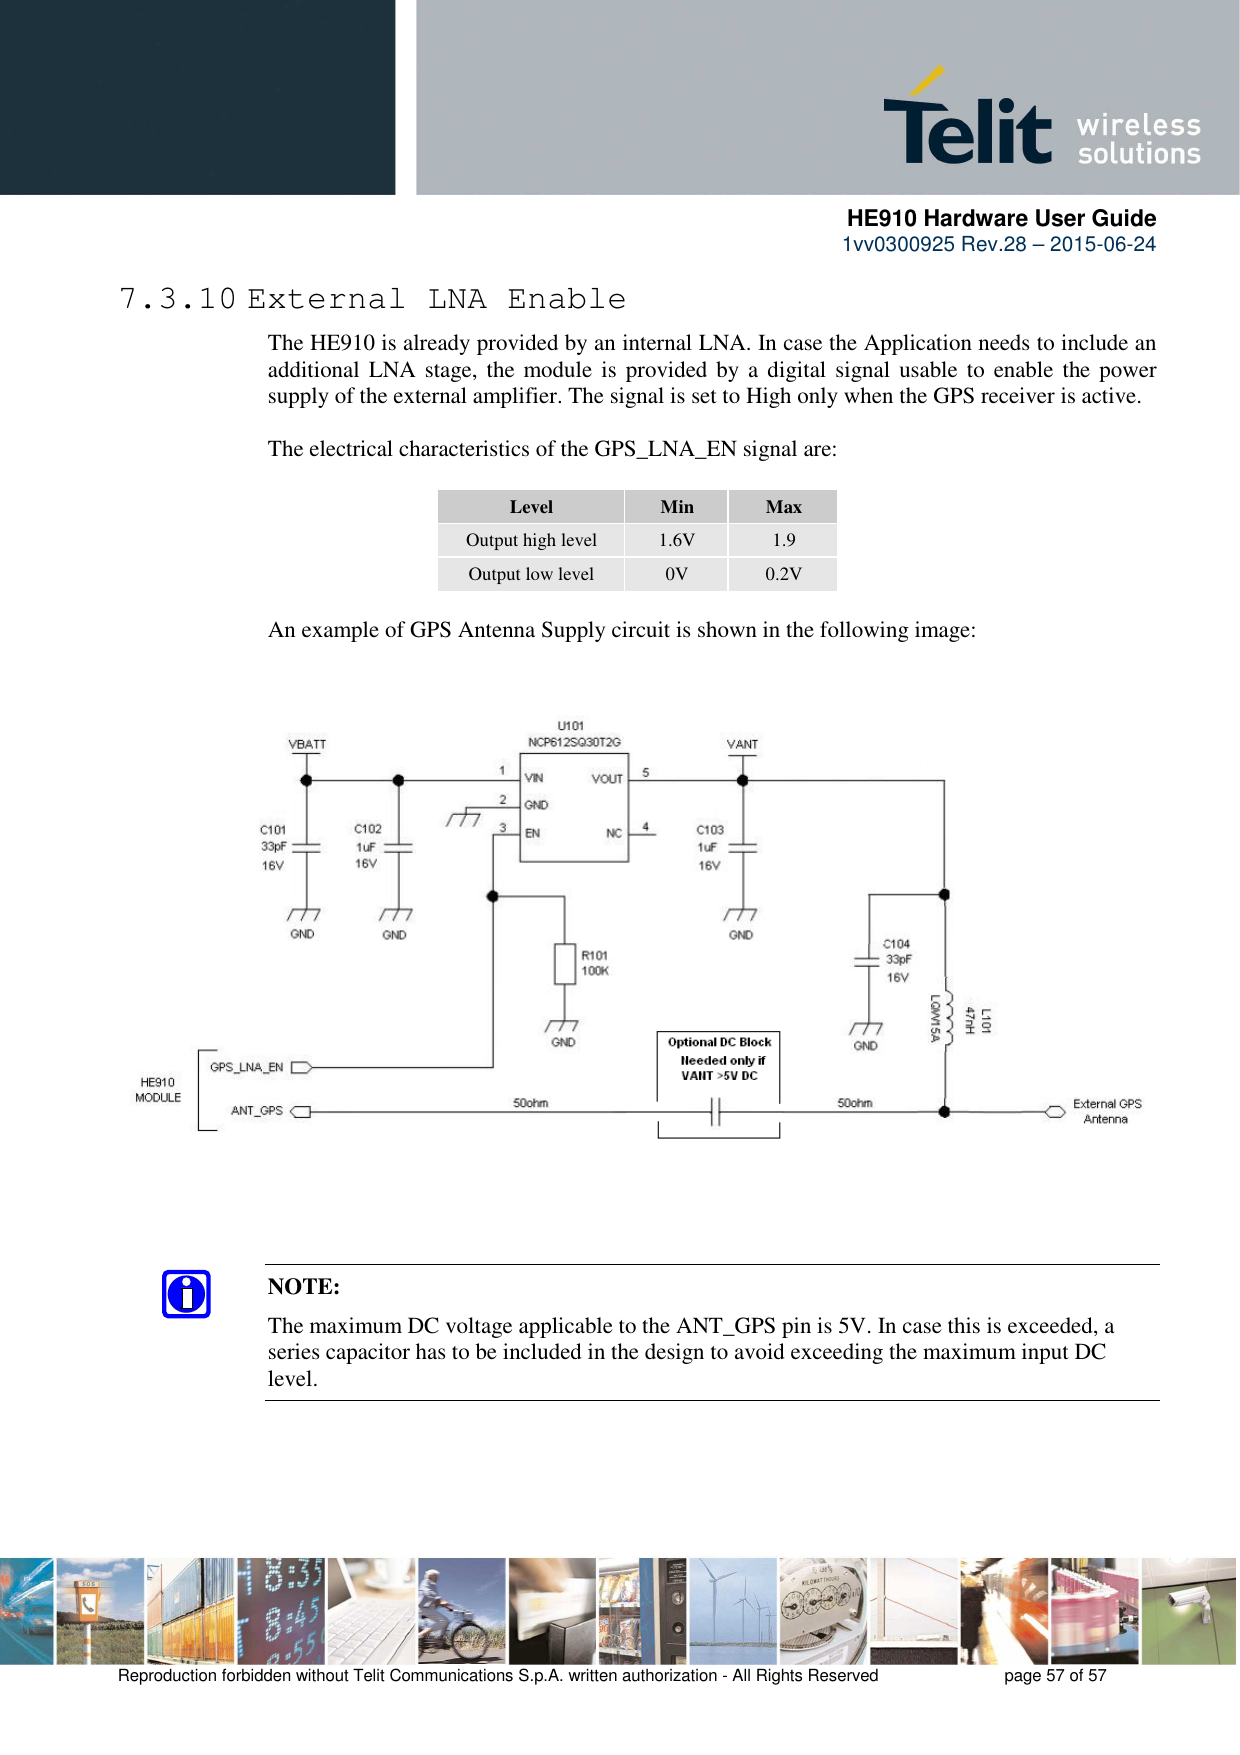      HE910 Hardware User Guide 1vv0300925 Rev.28 – 2015-06-24    Reproduction forbidden without Telit Communications S.p.A. written authorization - All Rights Reserved    page 57 of 57  7.3.10 External LNA Enable The HE910 is already provided by an internal LNA. In case the Application needs to include an additional LNA stage, the module is  provided by a  digital  signal usable to enable the power supply of the external amplifier. The signal is set to High only when the GPS receiver is active.  The electrical characteristics of the GPS_LNA_EN signal are:  Level  Min  Max Output high level  1.6V  1.9 Output low level  0V  0.2V  An example of GPS Antenna Supply circuit is shown in the following image:       NOTE: The maximum DC voltage applicable to the ANT_GPS pin is 5V. In case this is exceeded, a series capacitor has to be included in the design to avoid exceeding the maximum input DC level. 